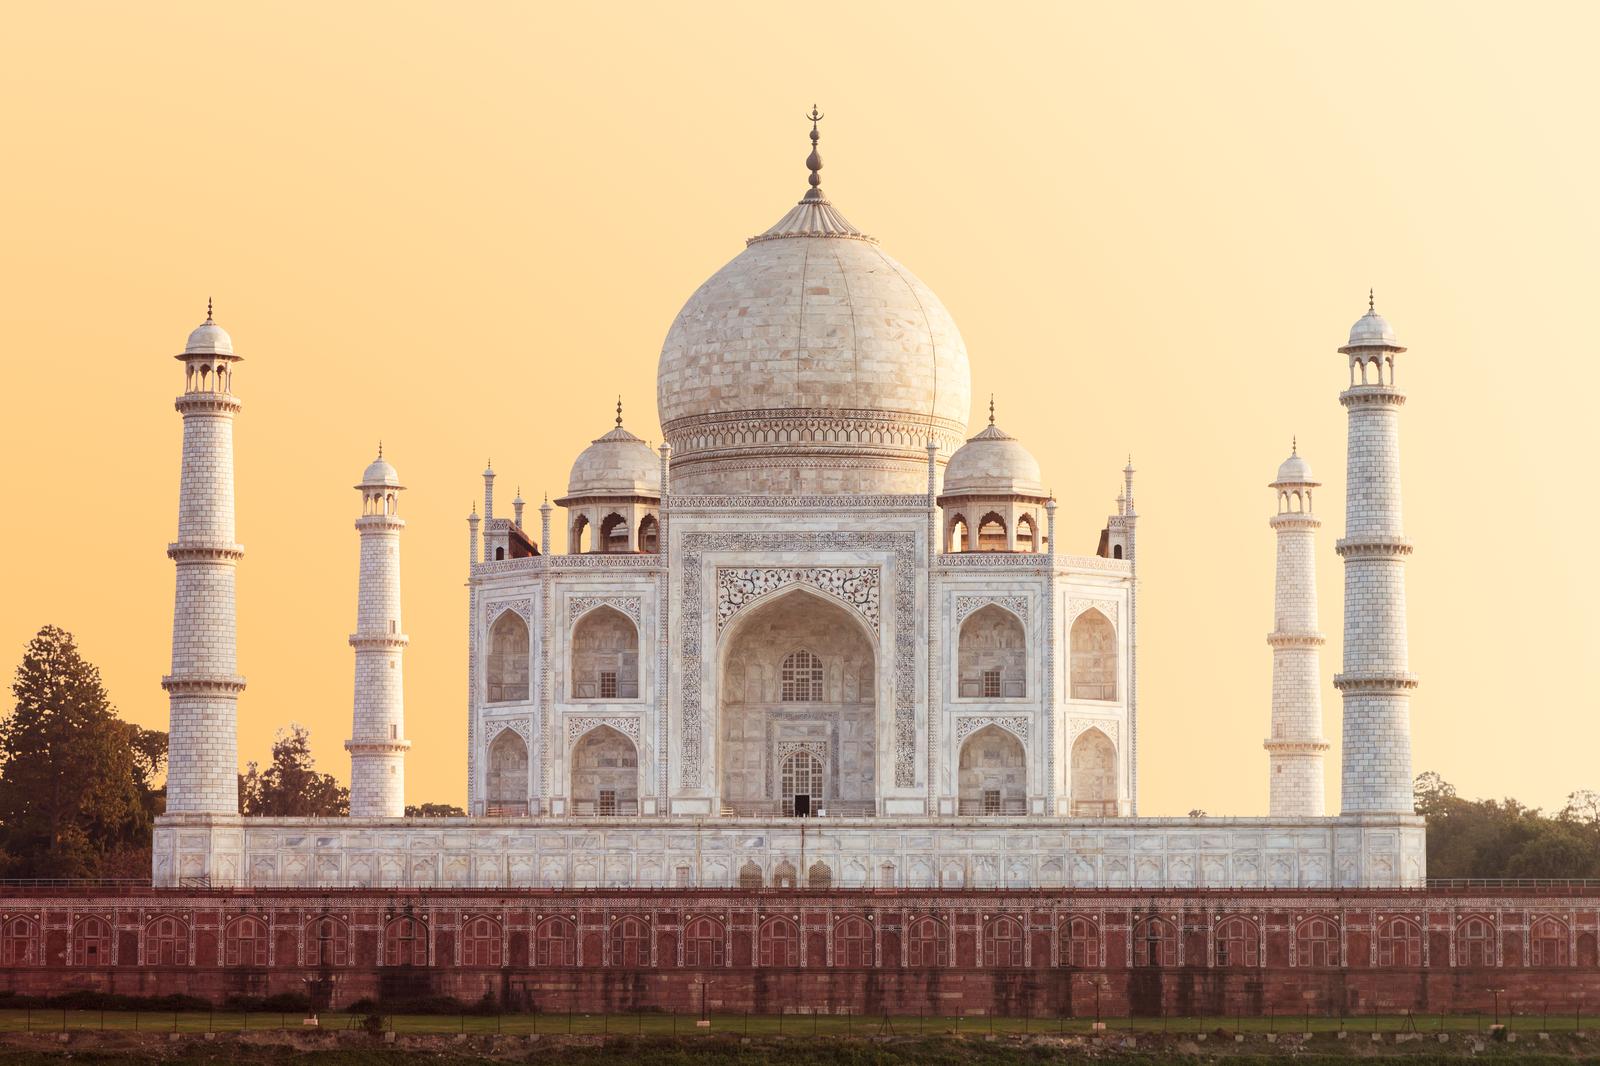 Can You Pass This 40-Question Geography Test That Gets Progressively Harder With Each Question? Taj Mahal, Agra, India